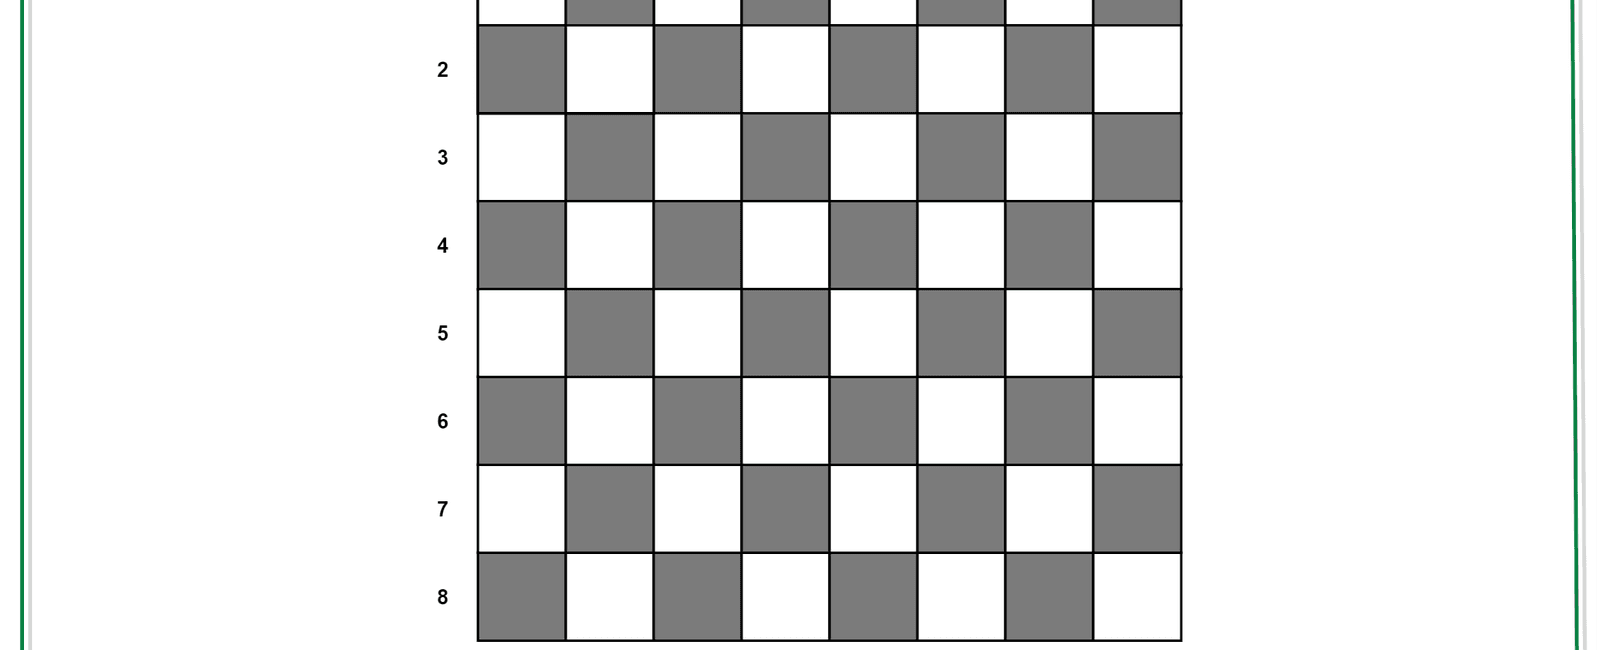 How many squares are there on a standard chessboard 64